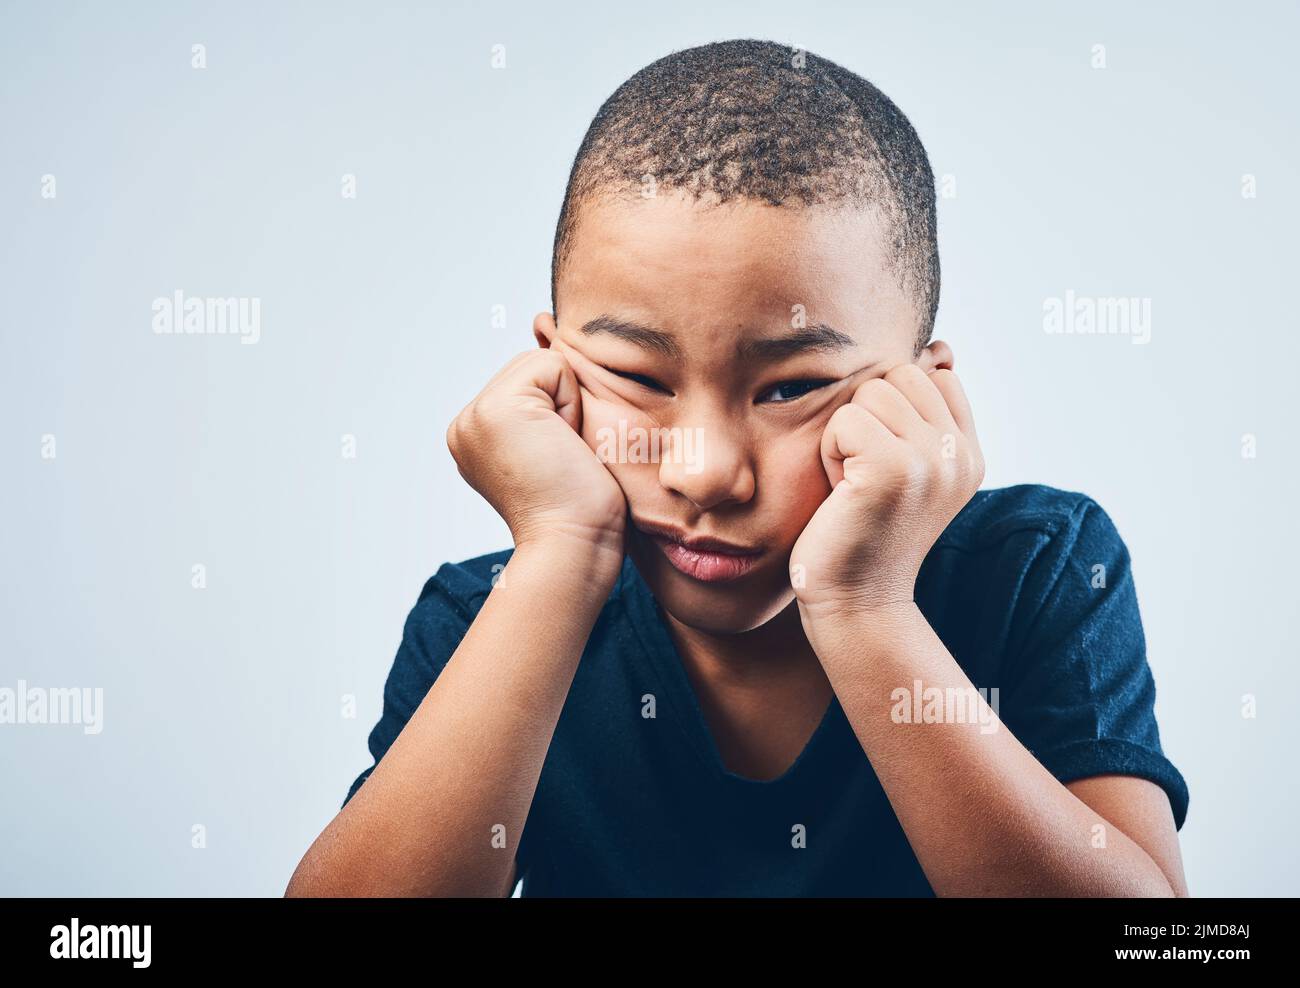 So bored even my bored is bored. Studio shot of a cute little boy looking bored against a grey background. Stock Photo